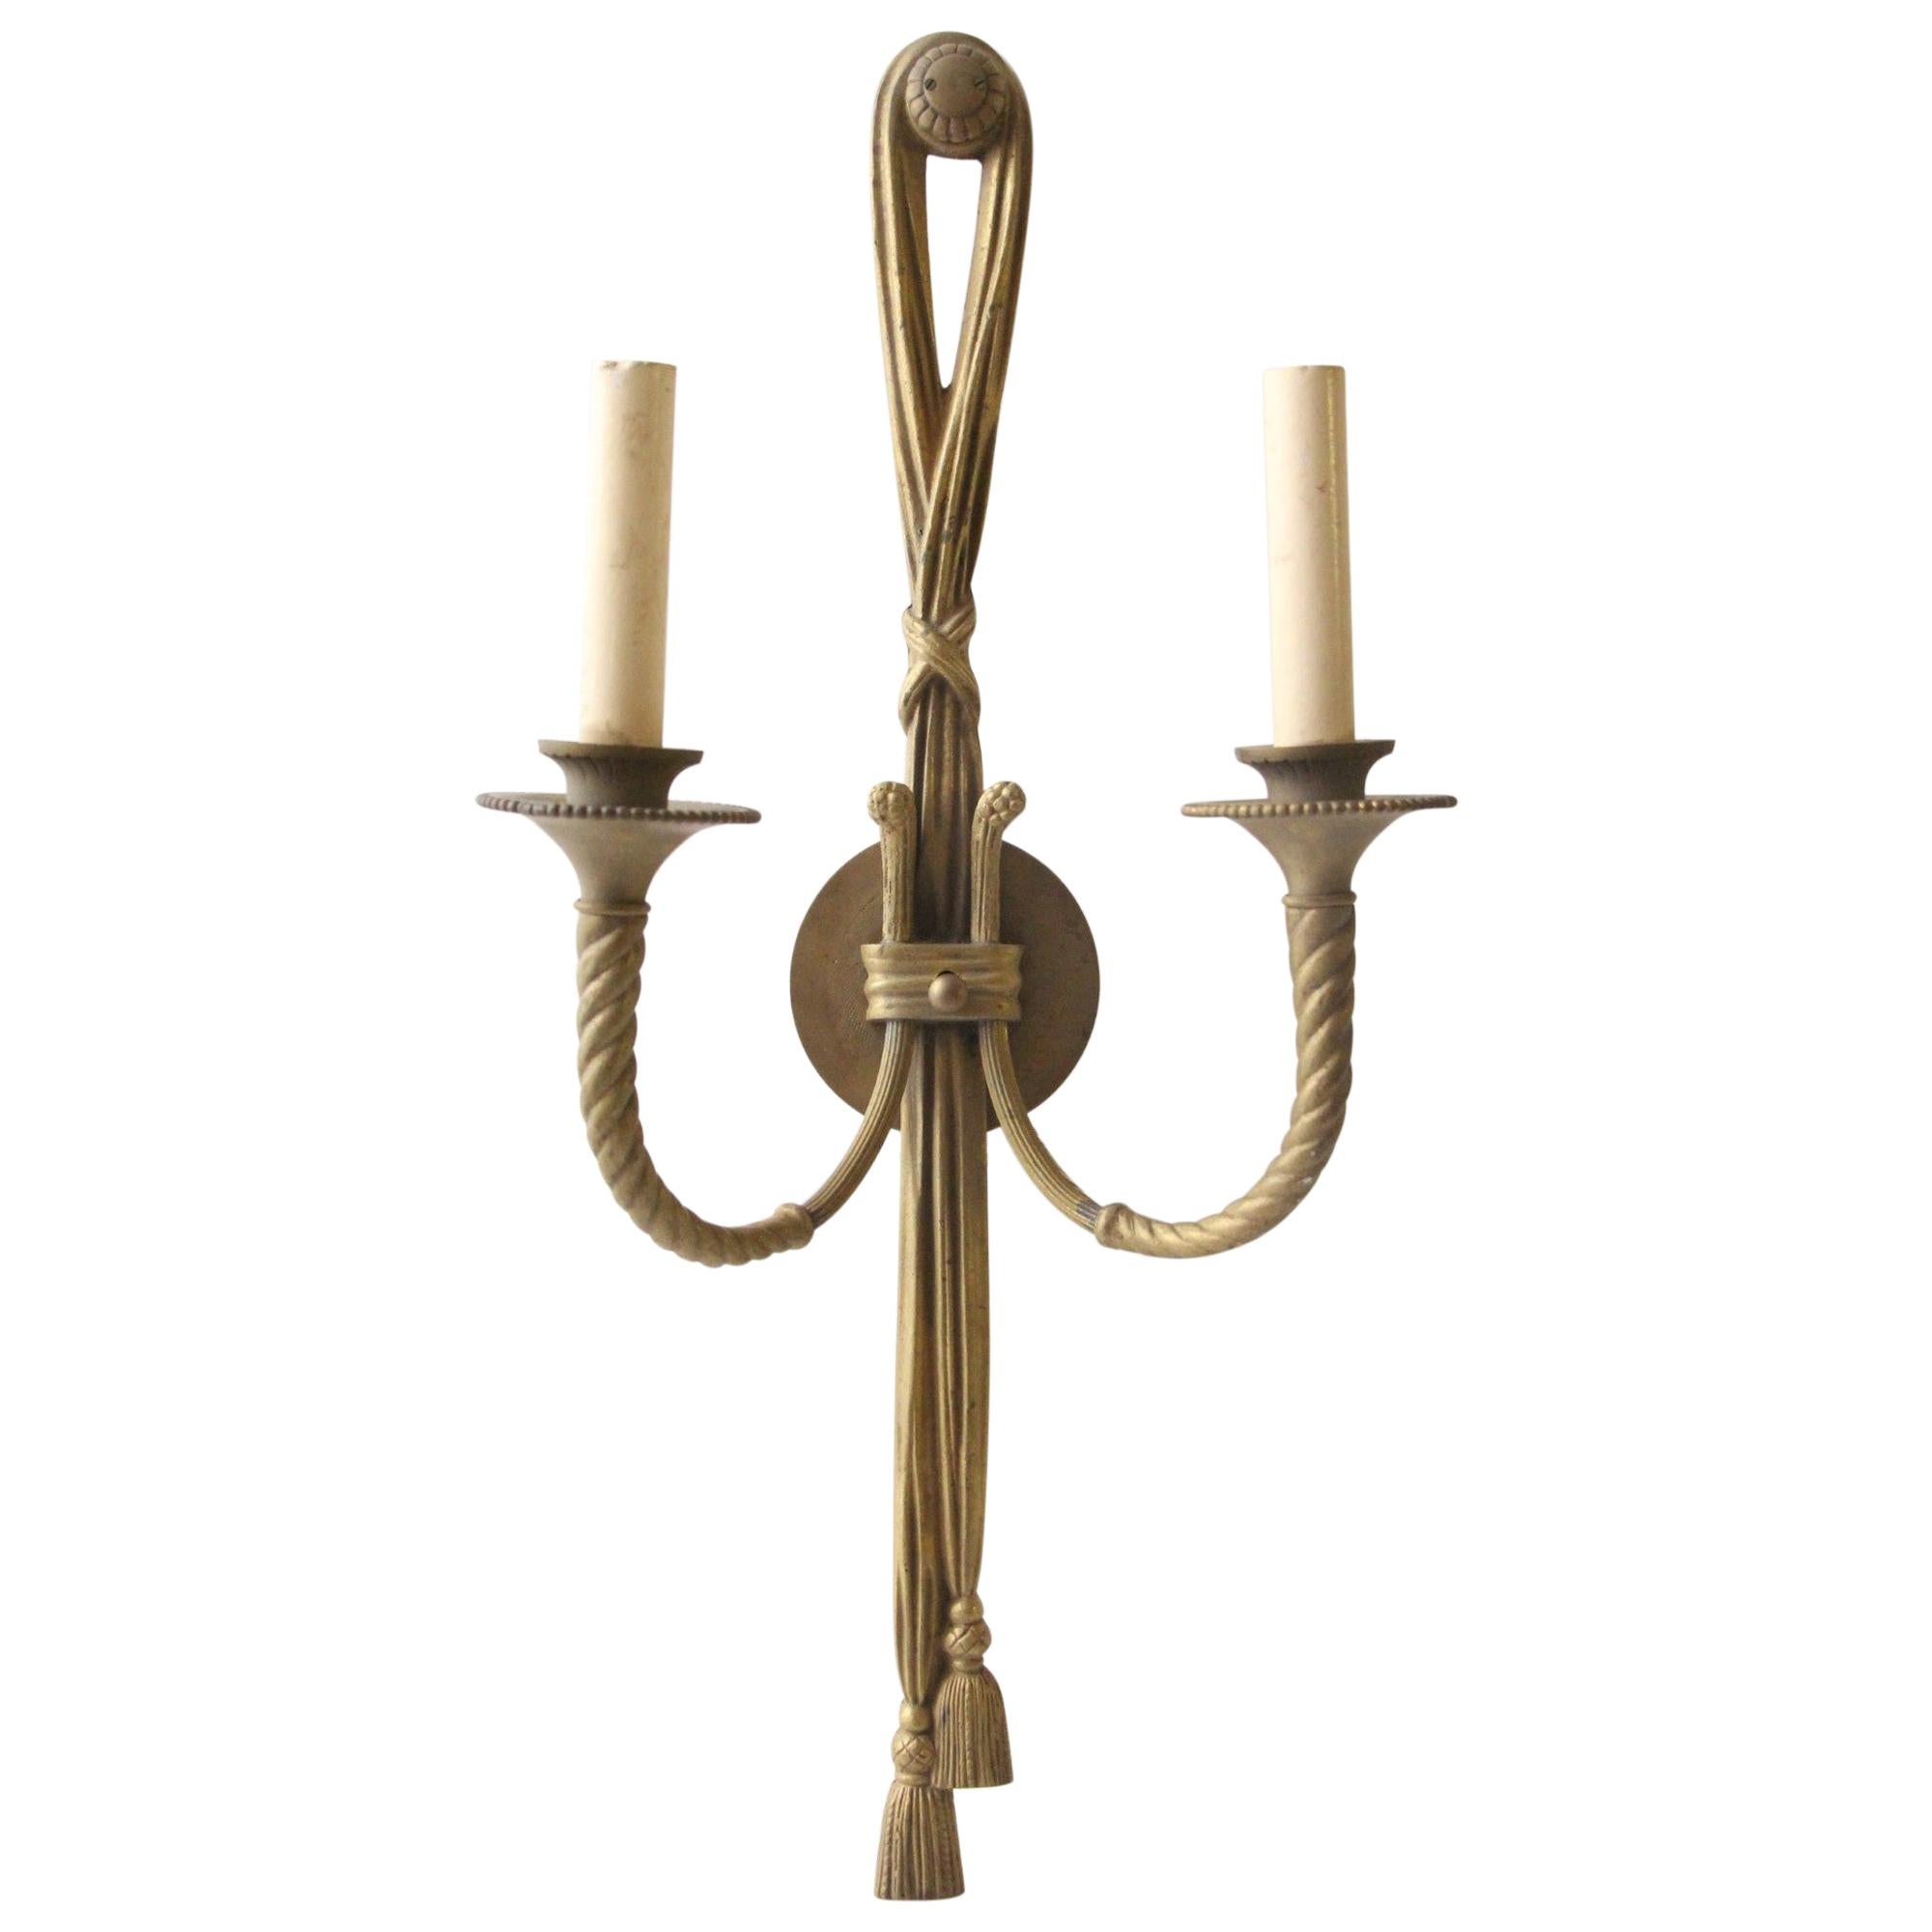 1980s NYC Waldorf Astoria Hotel Wall Sconce Neoclassical Gilded Two Arm Brass